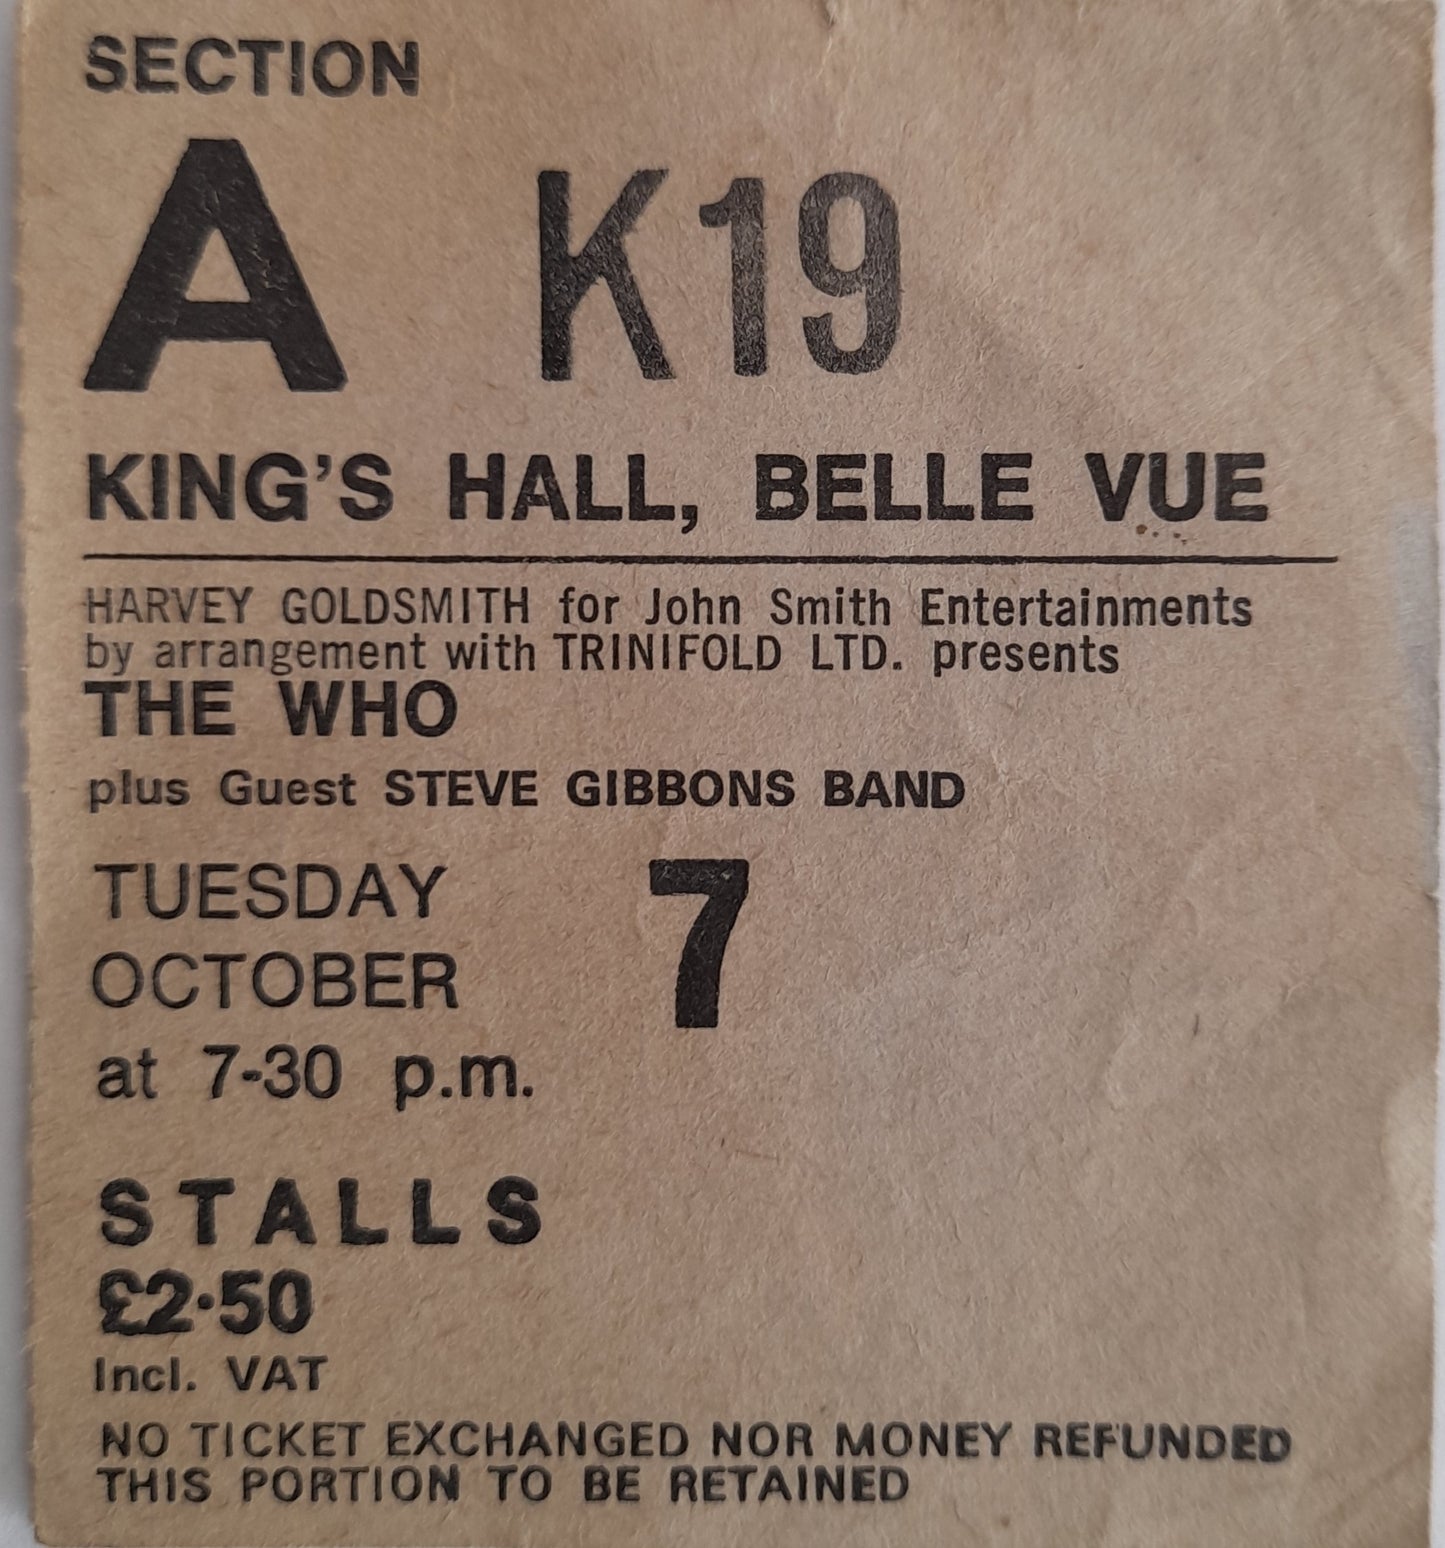 The Who used concert ticket stub for 7th October 1975 in Manchester - RewindPressPlay